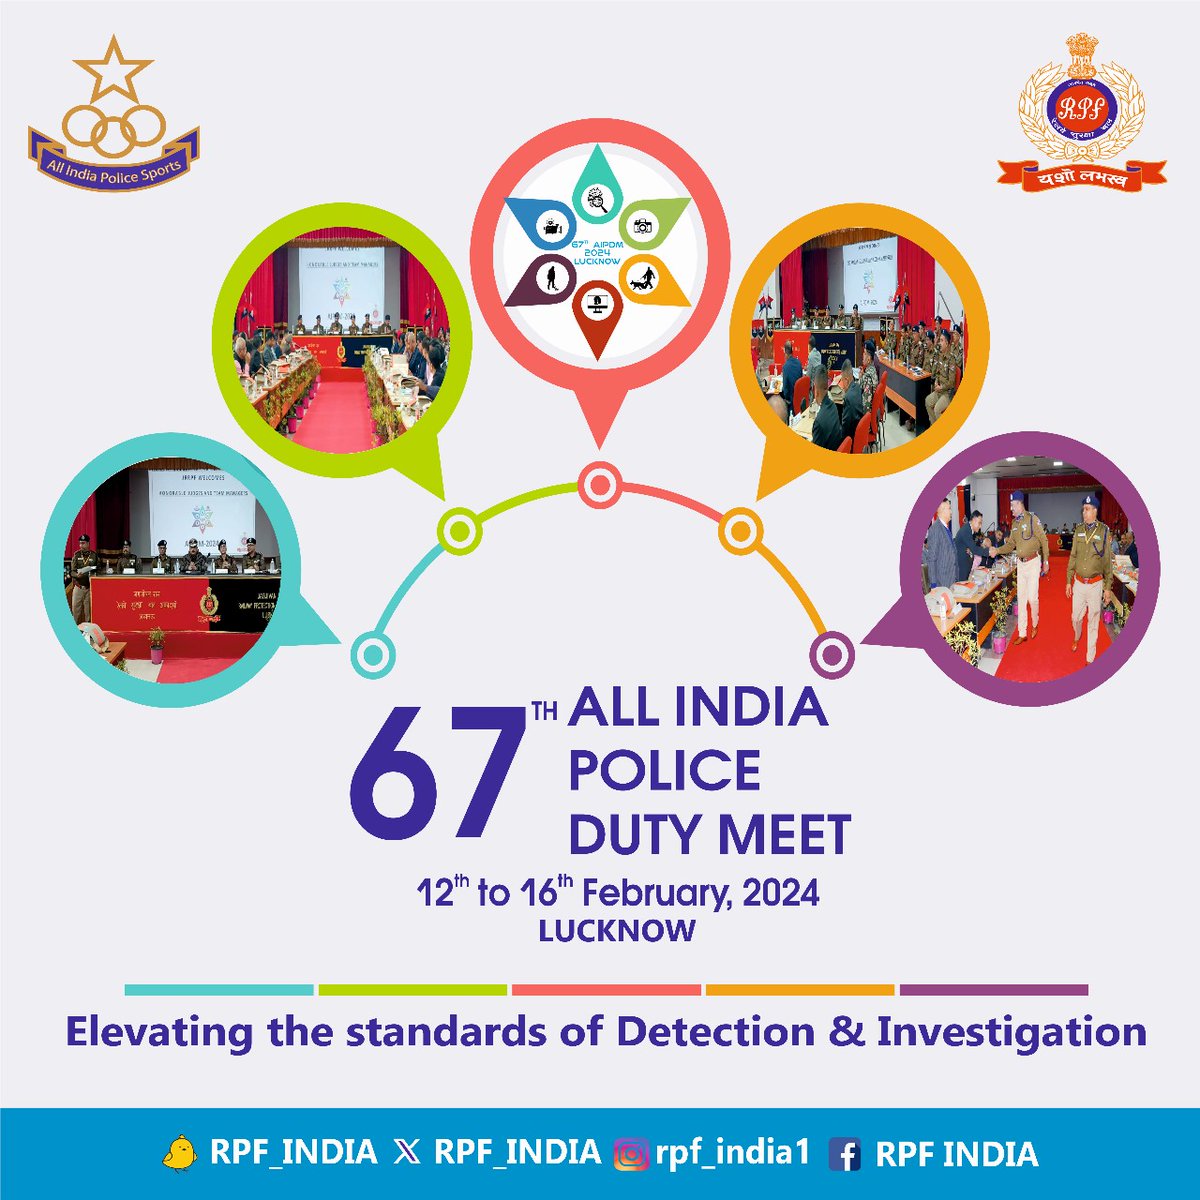 Excitement fills the air as we kick off the eagerly anticipated #67thAIPDM hosted by @RPF_INDIA in Lucknow with the team managers clinic today! Join us for a jubilant celebration. #AIPDM #RPFIndia #LawEnforcement #Collaboration #SafetyFirst #EventKickoff #DetectAndInvestigate